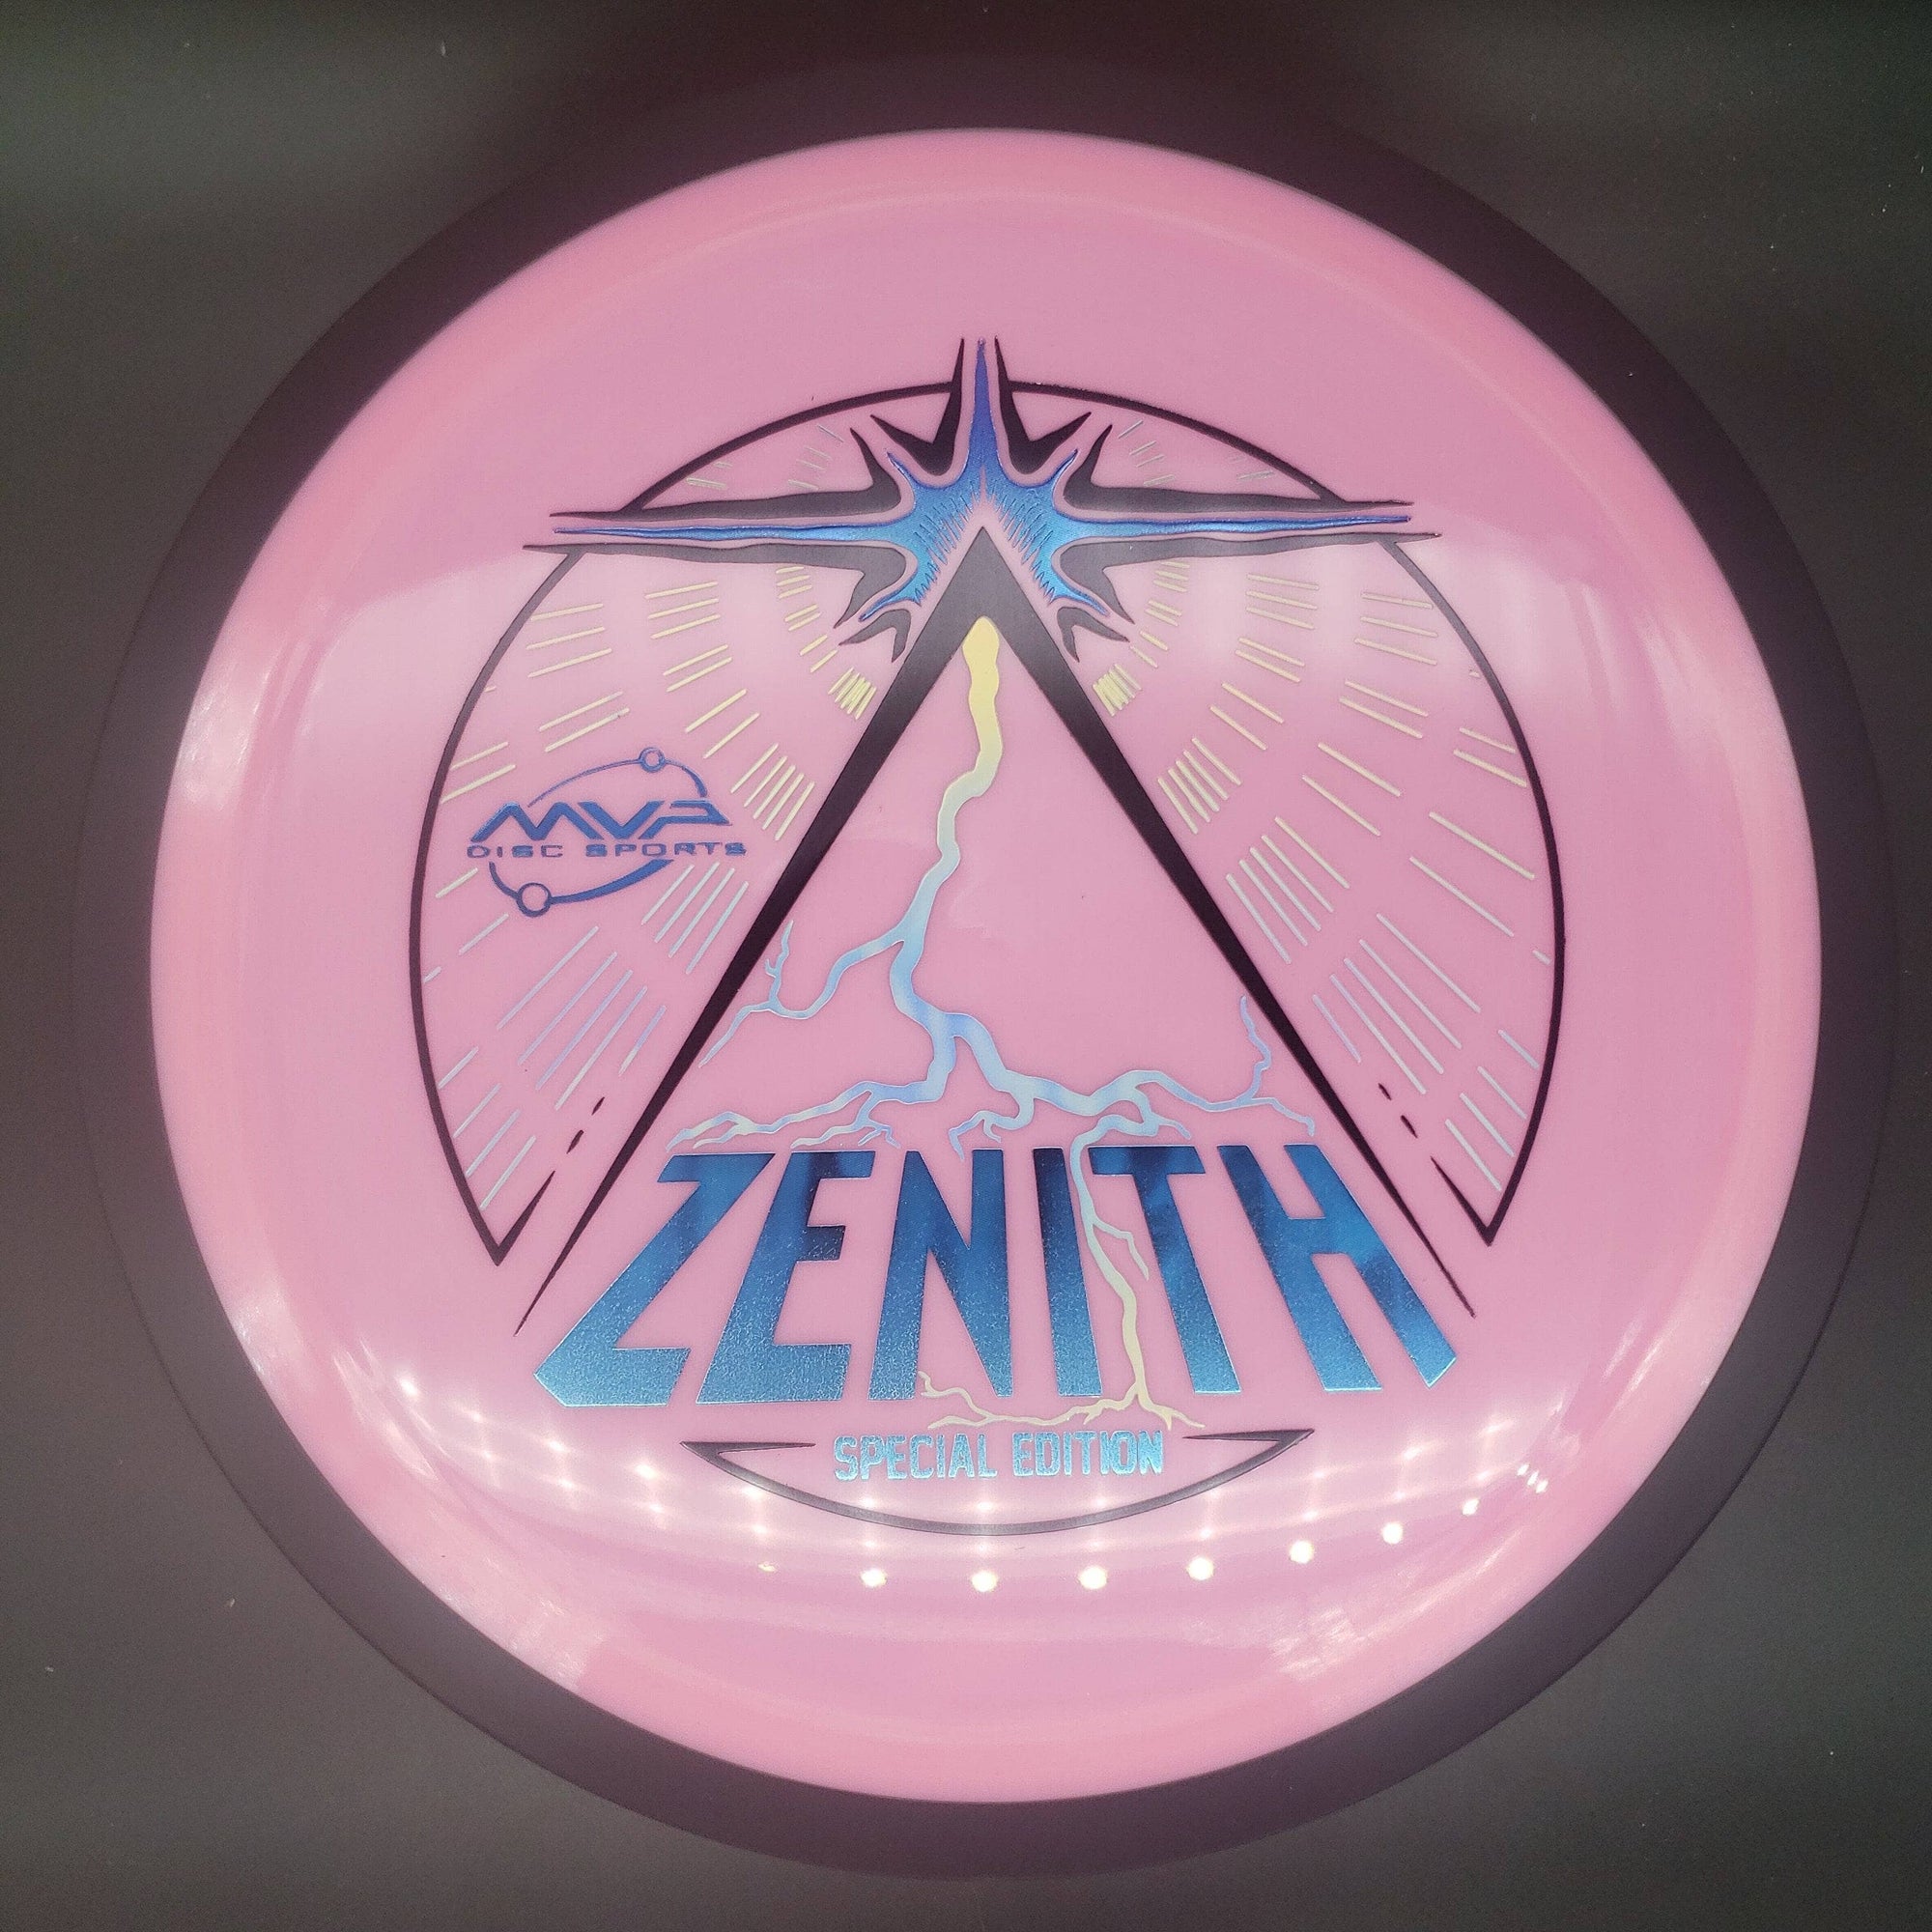 MVP Distance Driver Zenith, Special Edition